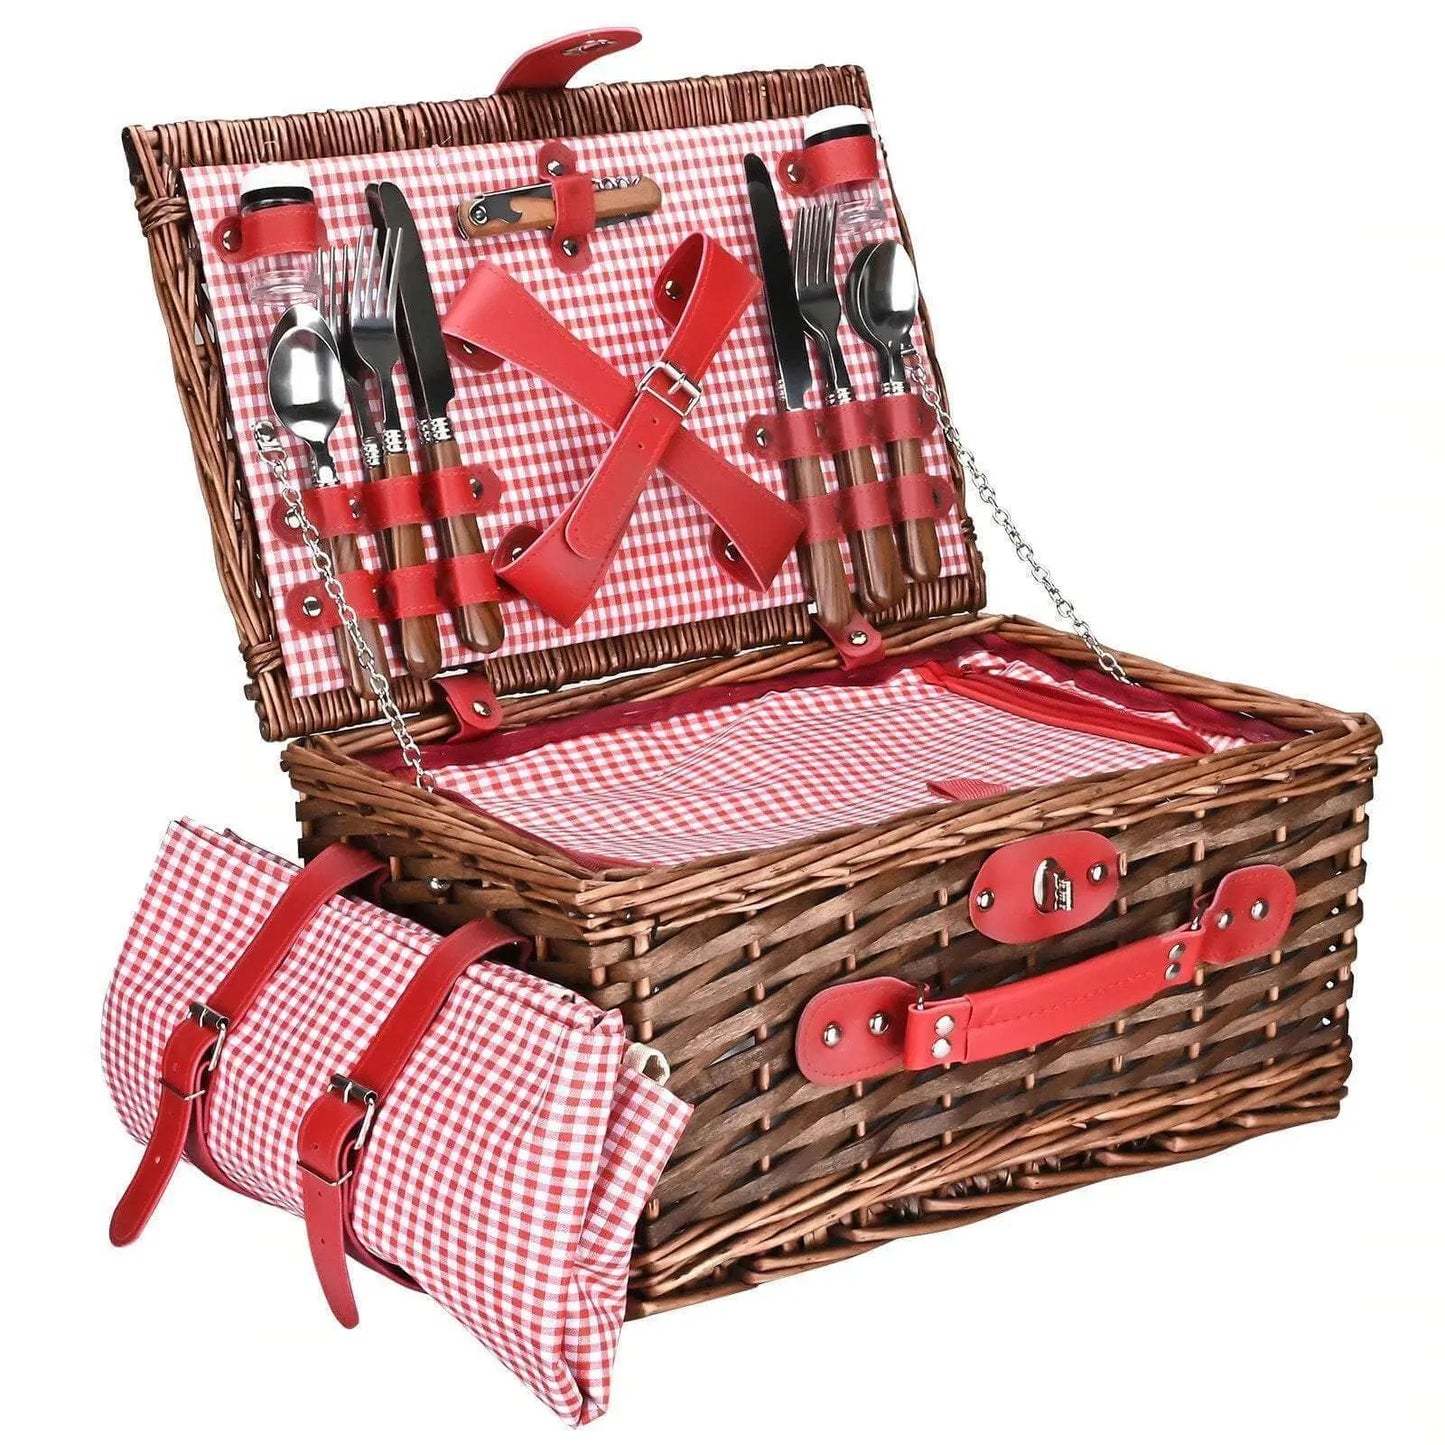 Elegant natural willow picnic basket by Hedgehog Decor, fully equipped for a family outing.